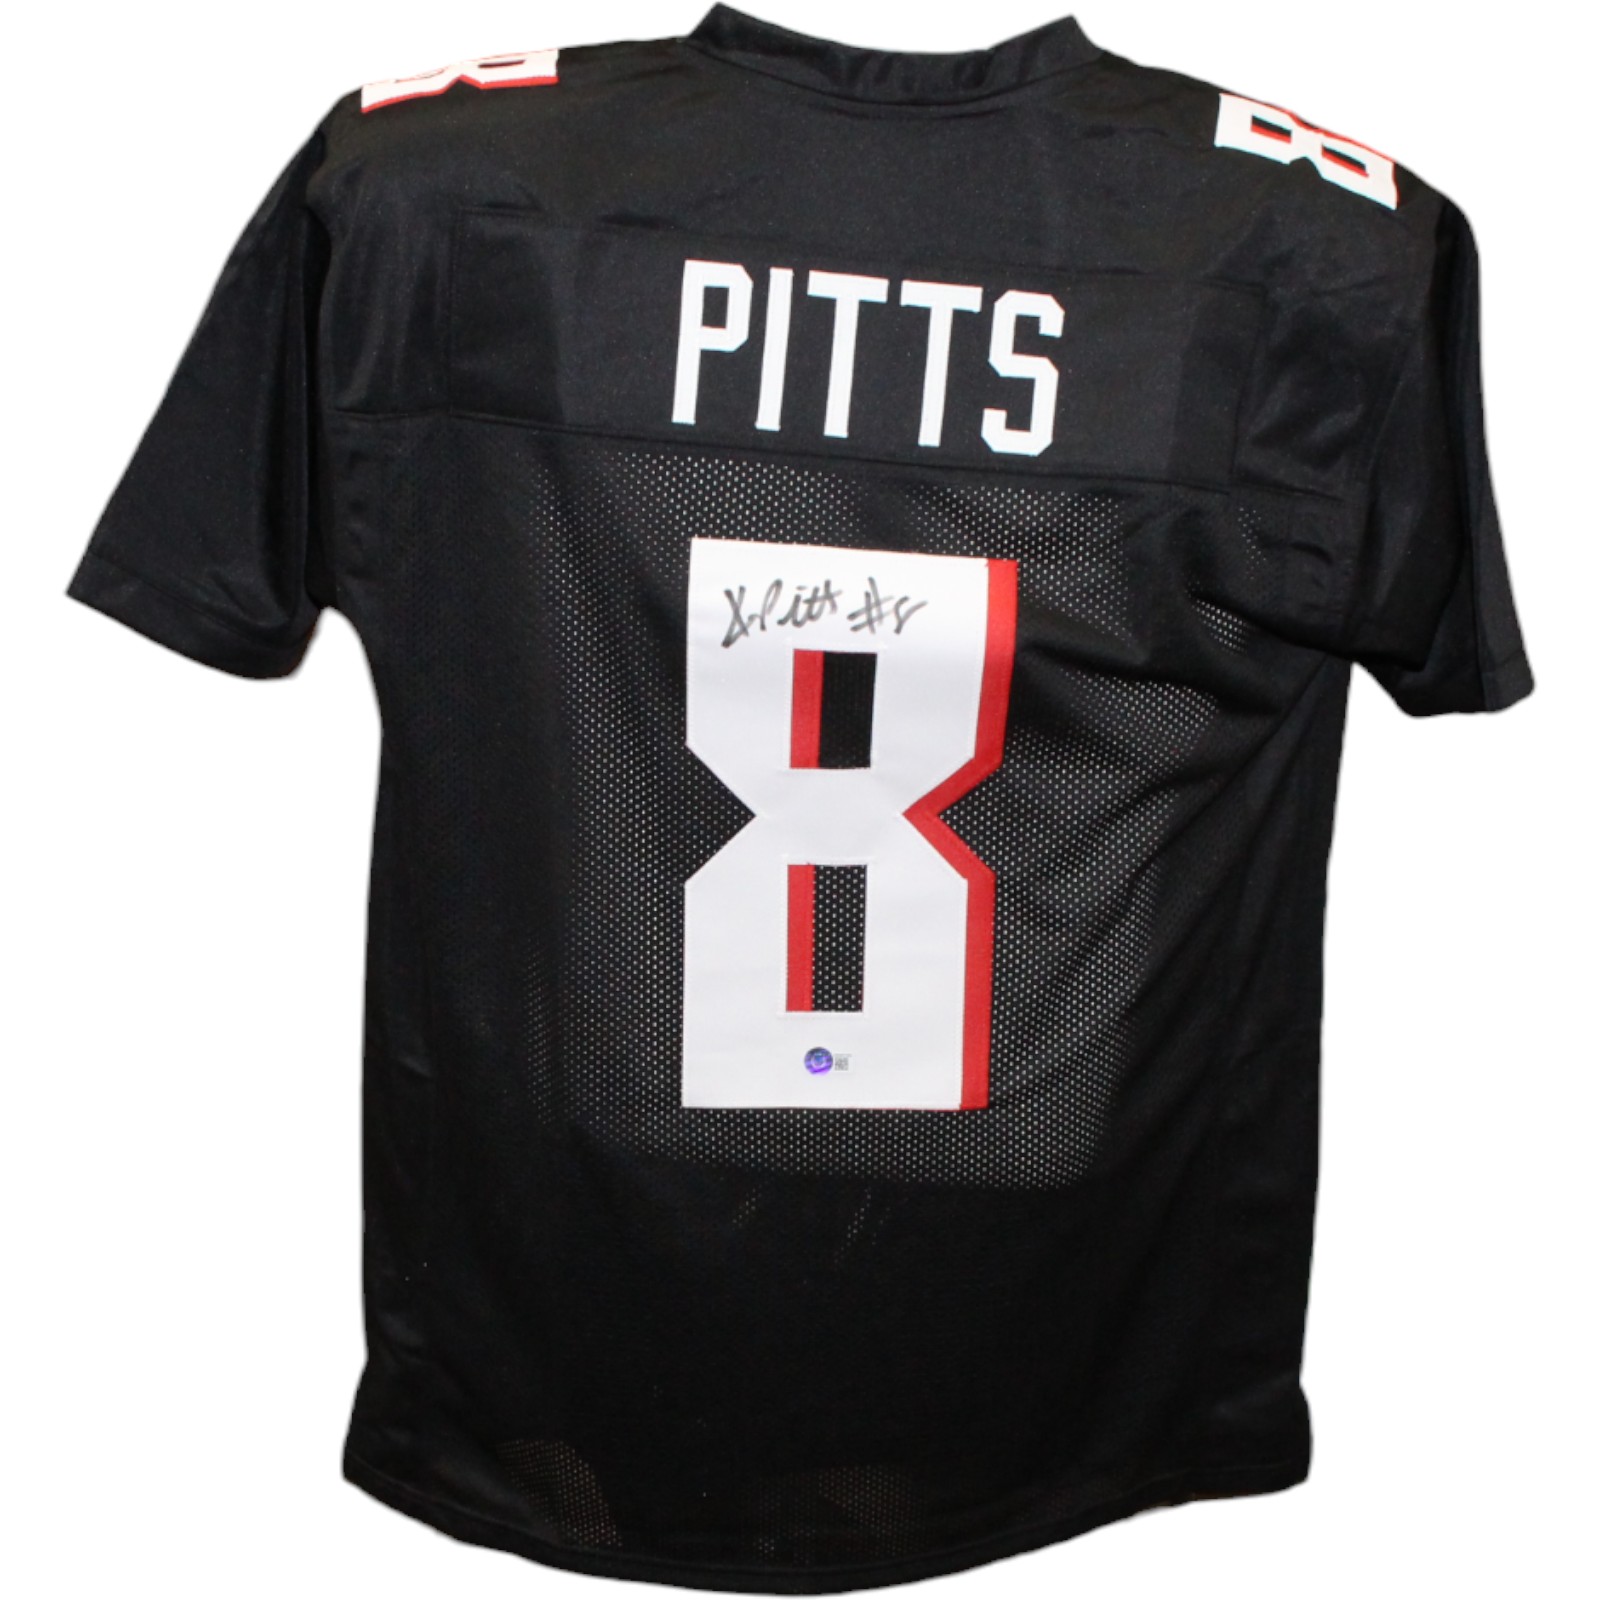 Kyle Pitts Autographed/Signed Pro Style Black Jersey Beckett